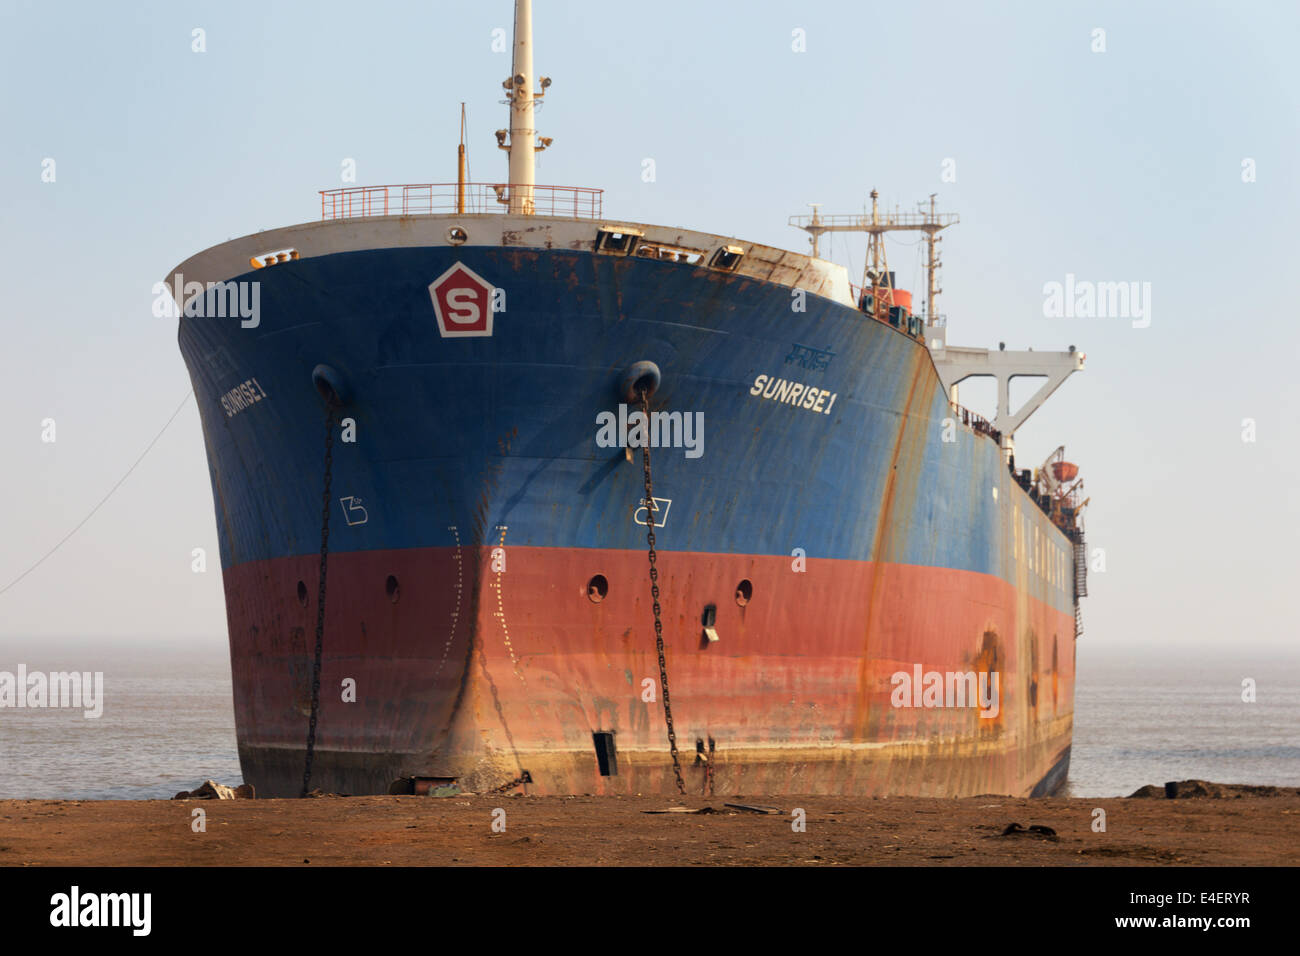 ALANG, INDIA - JANUARY 2014: Cargo ship intentionally driven on shore to be dismantled and scrapped at Alang ship breaking yard. Stock Photo